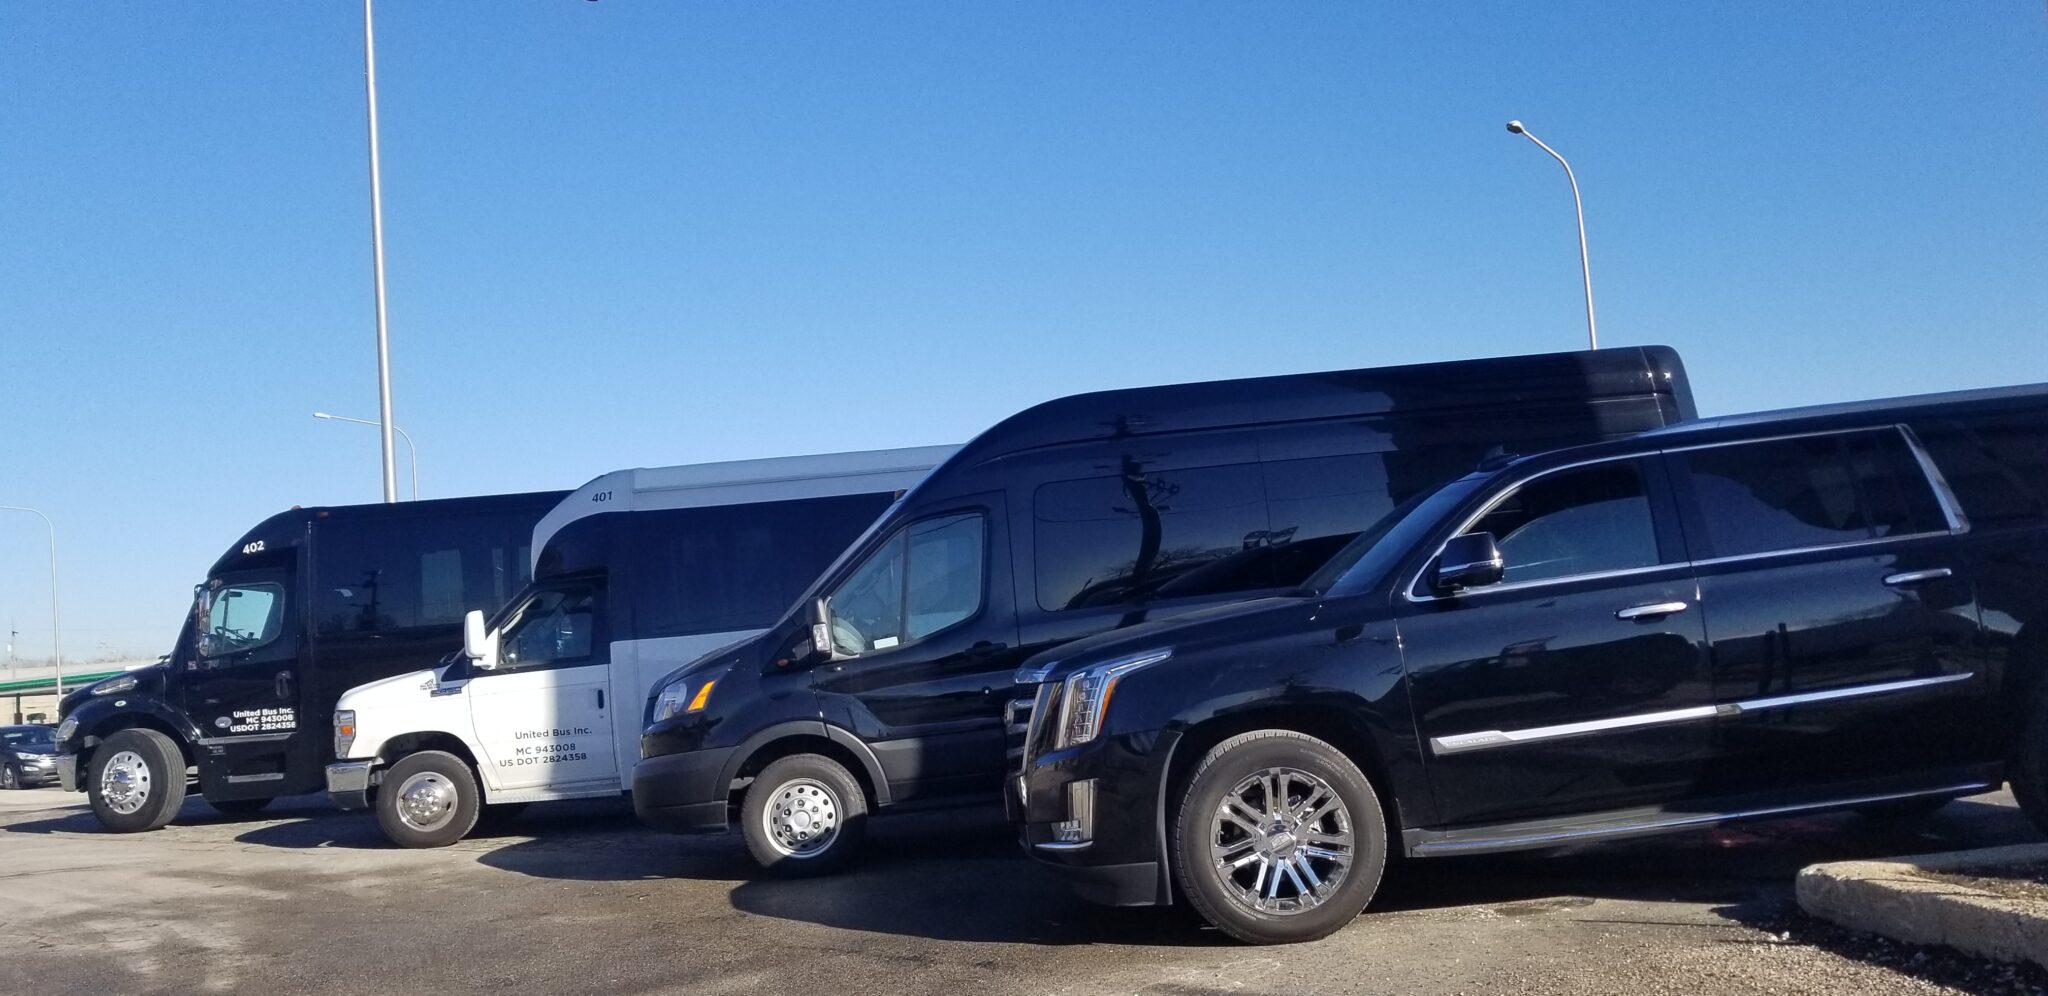 Fleet of SUVs and Buses